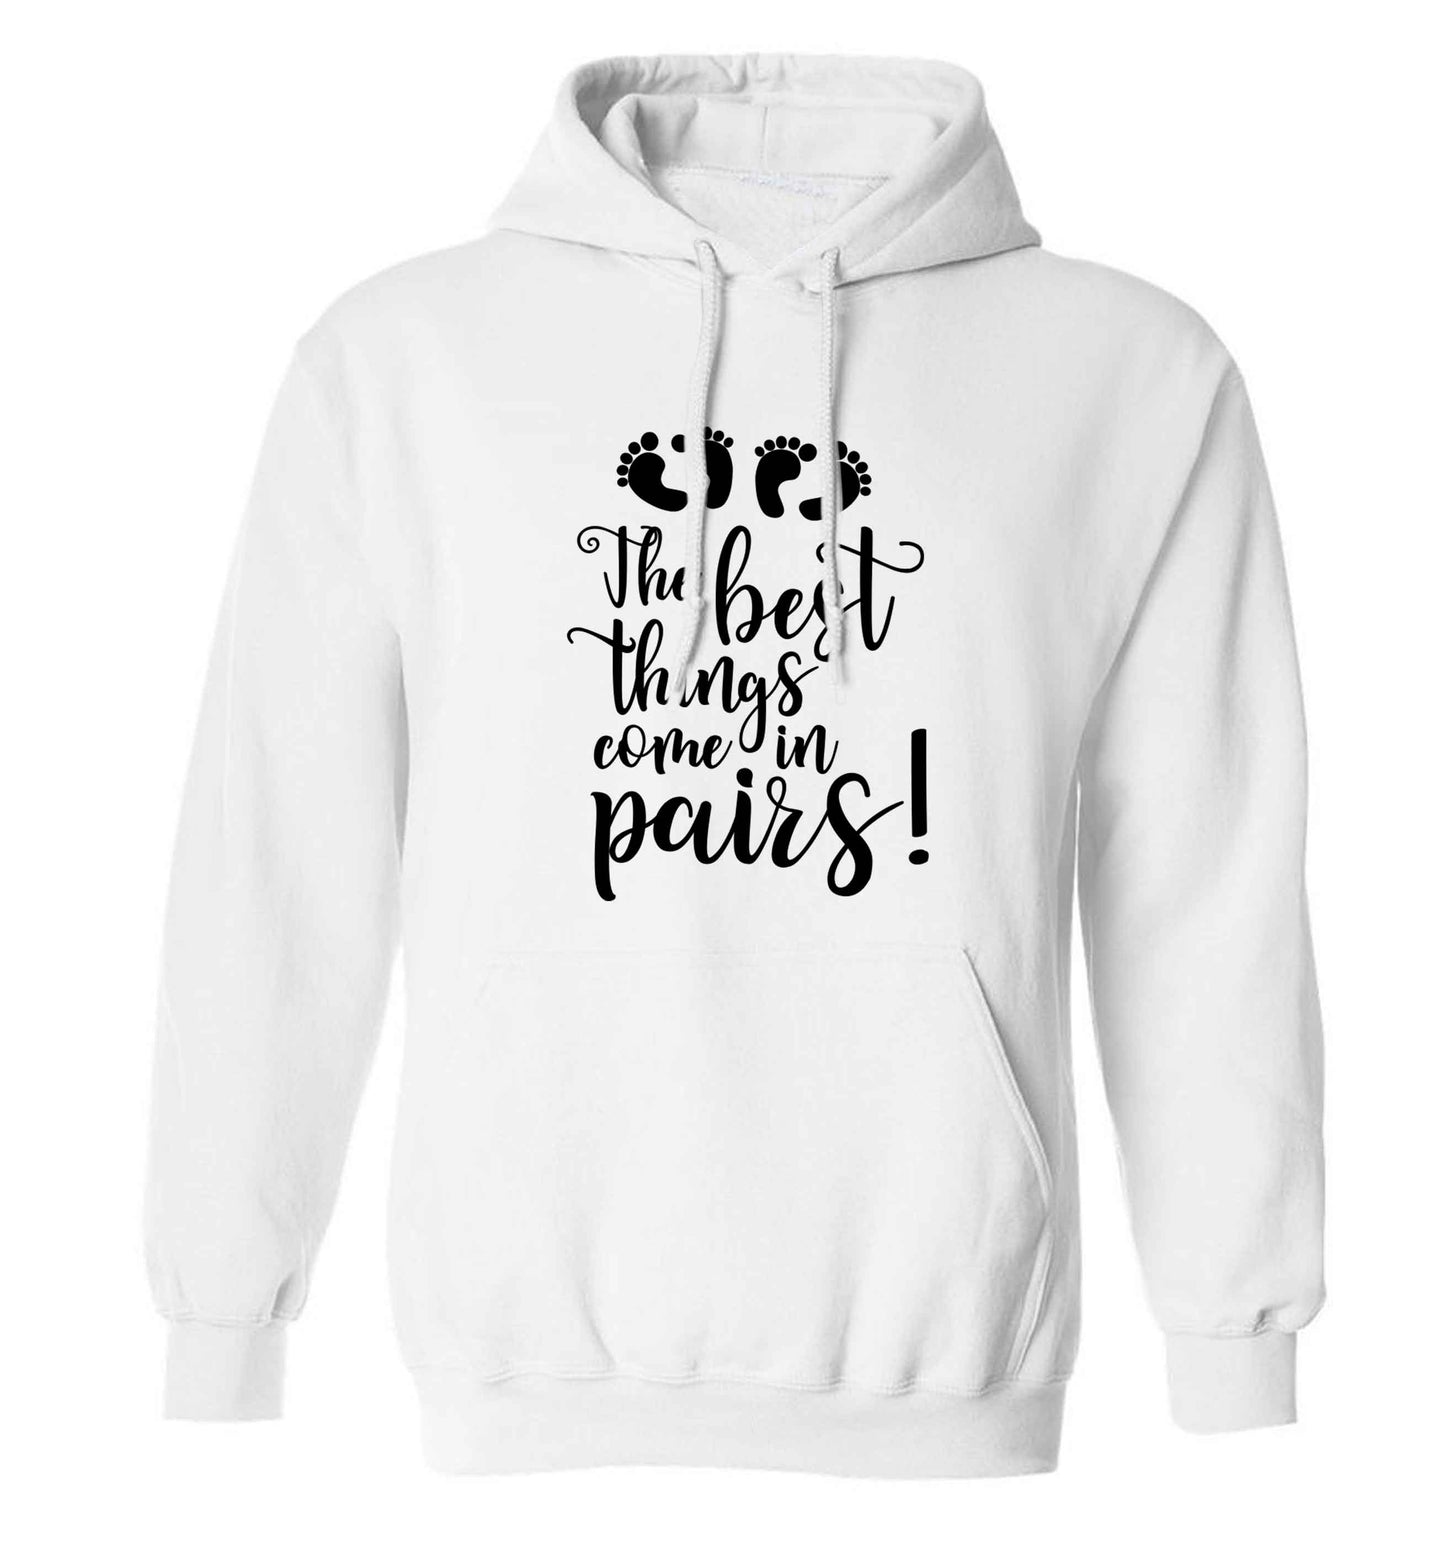 The best things come in pairs! adults unisex white hoodie 2XL